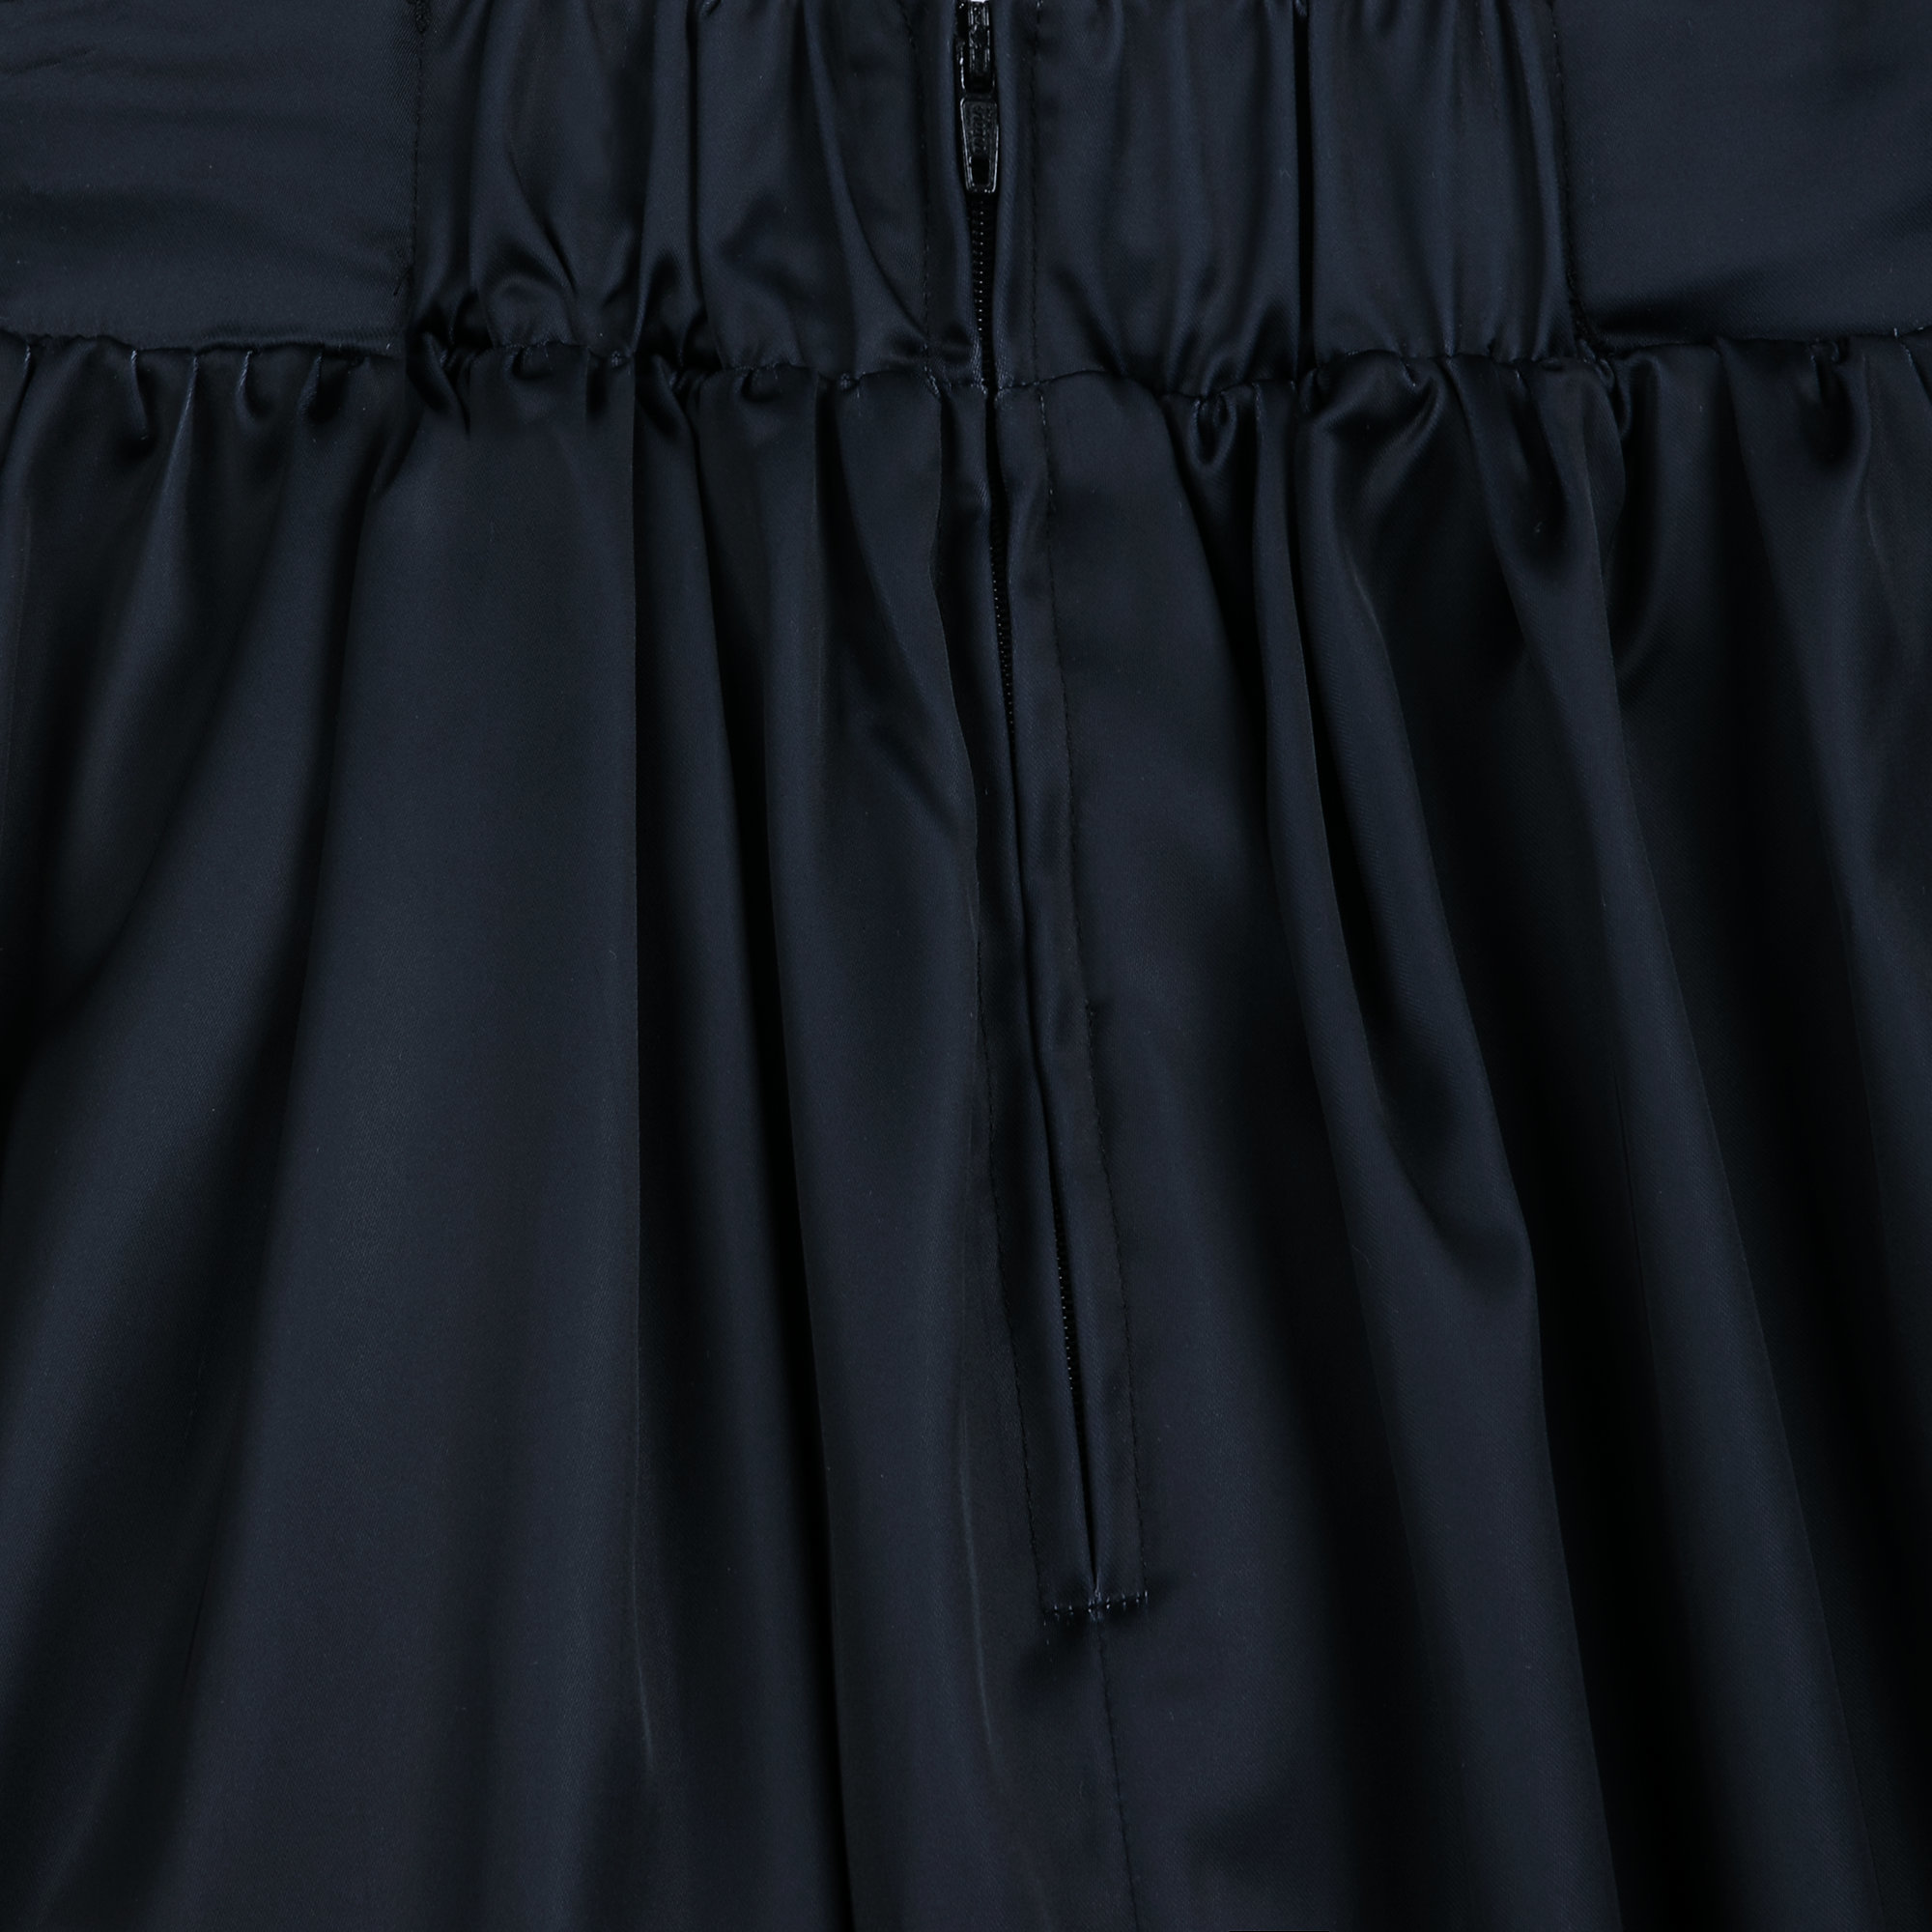 The Haunted Mansion Skirt 